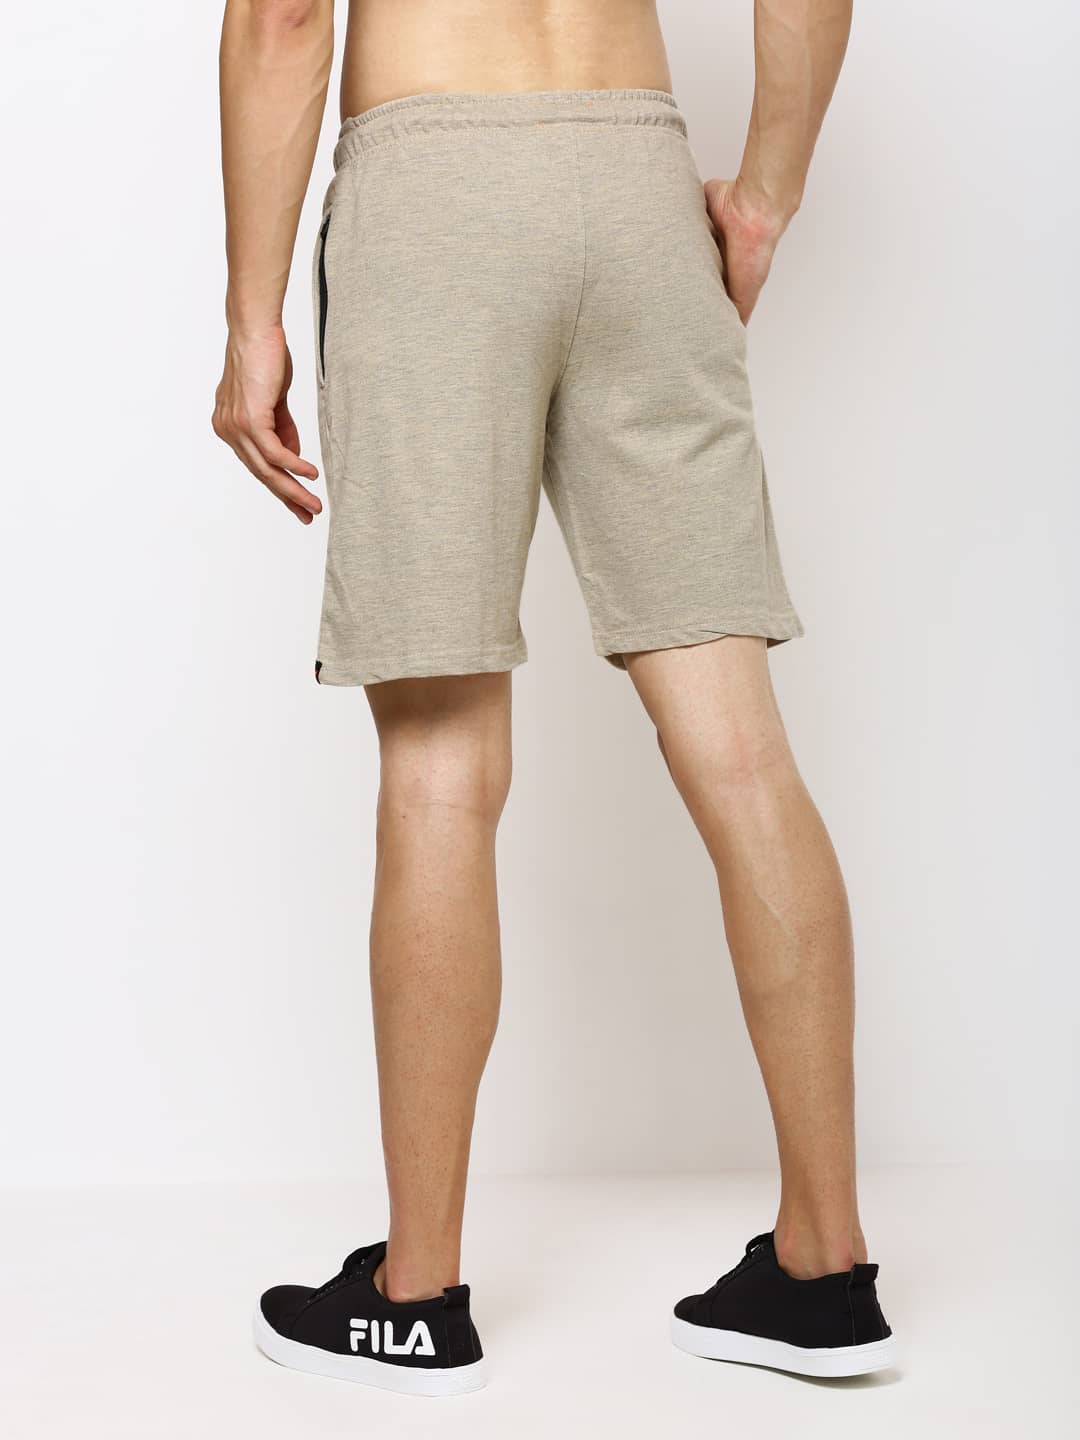 The Agreeable Beige Easy Shorts